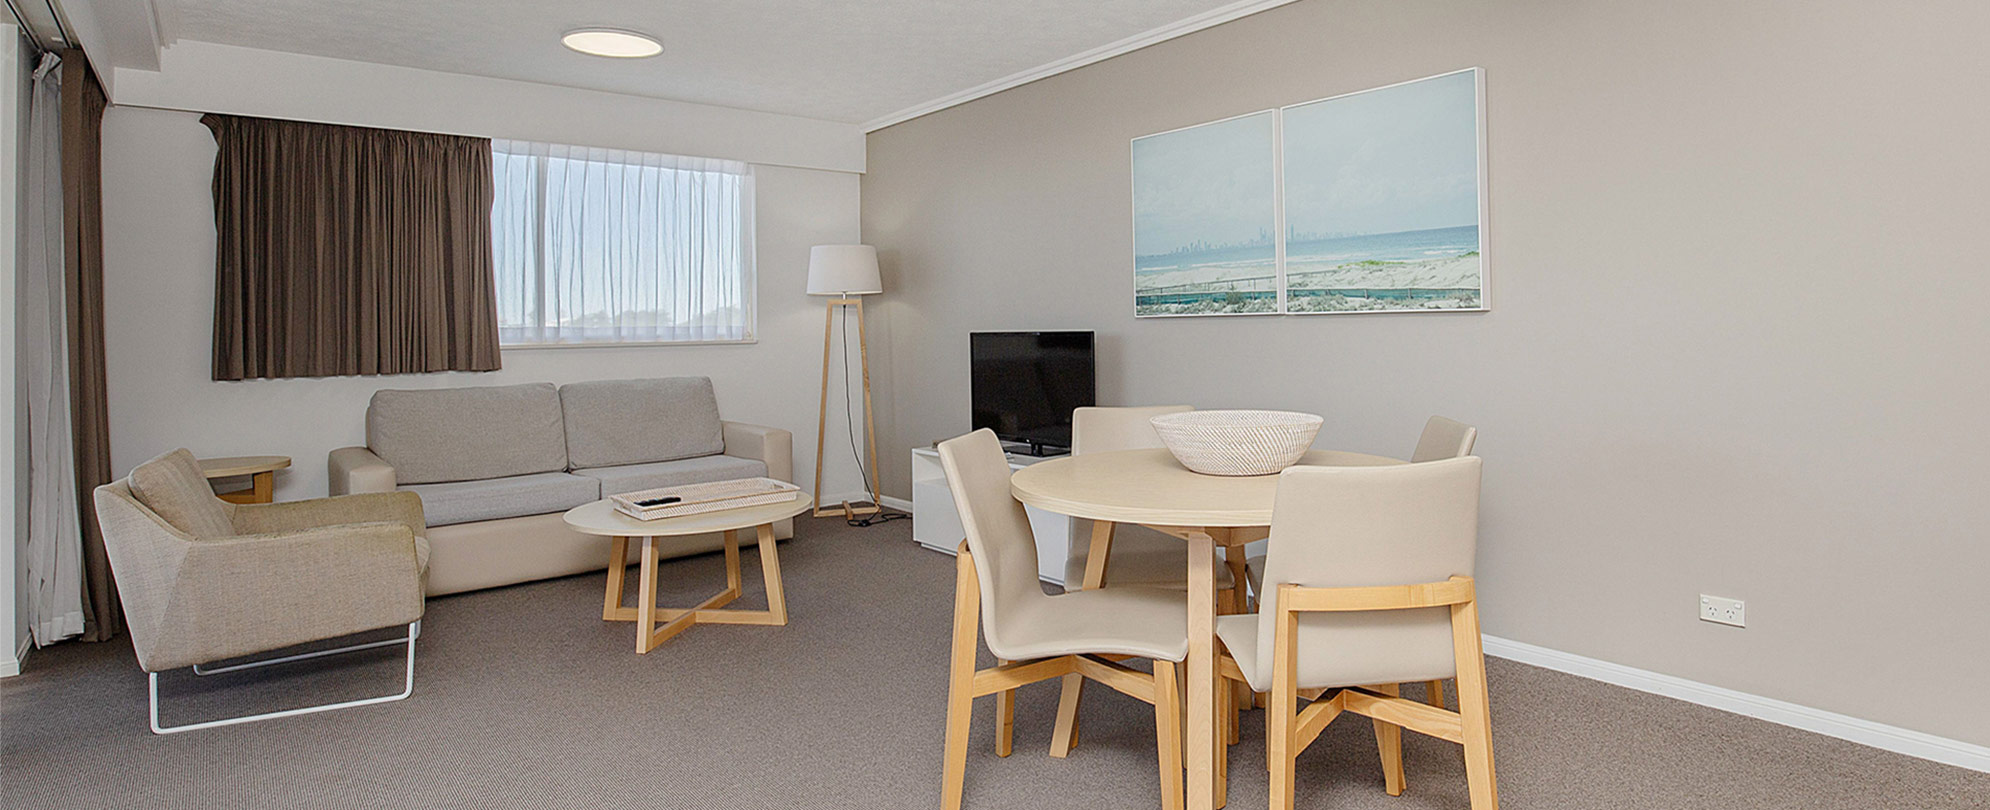 The living area and dining table with 4 chairs in a Club Wyndham Kirra Beach standard suite.